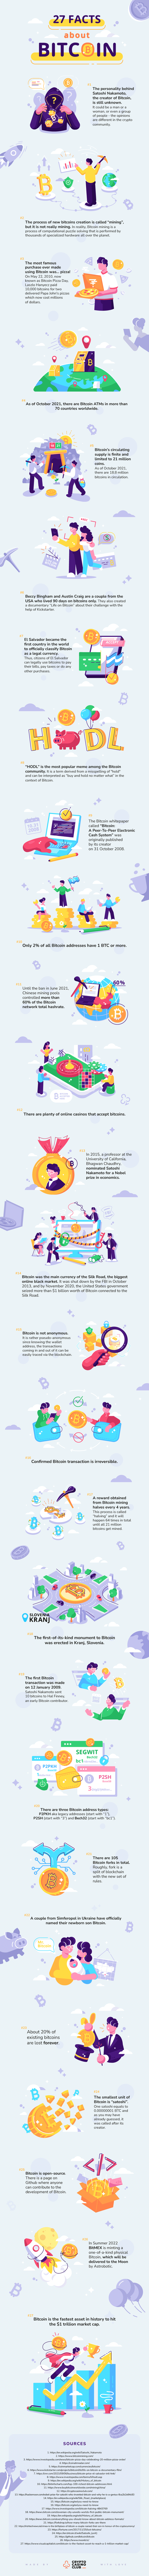 27-bitcoin-facts_infographic